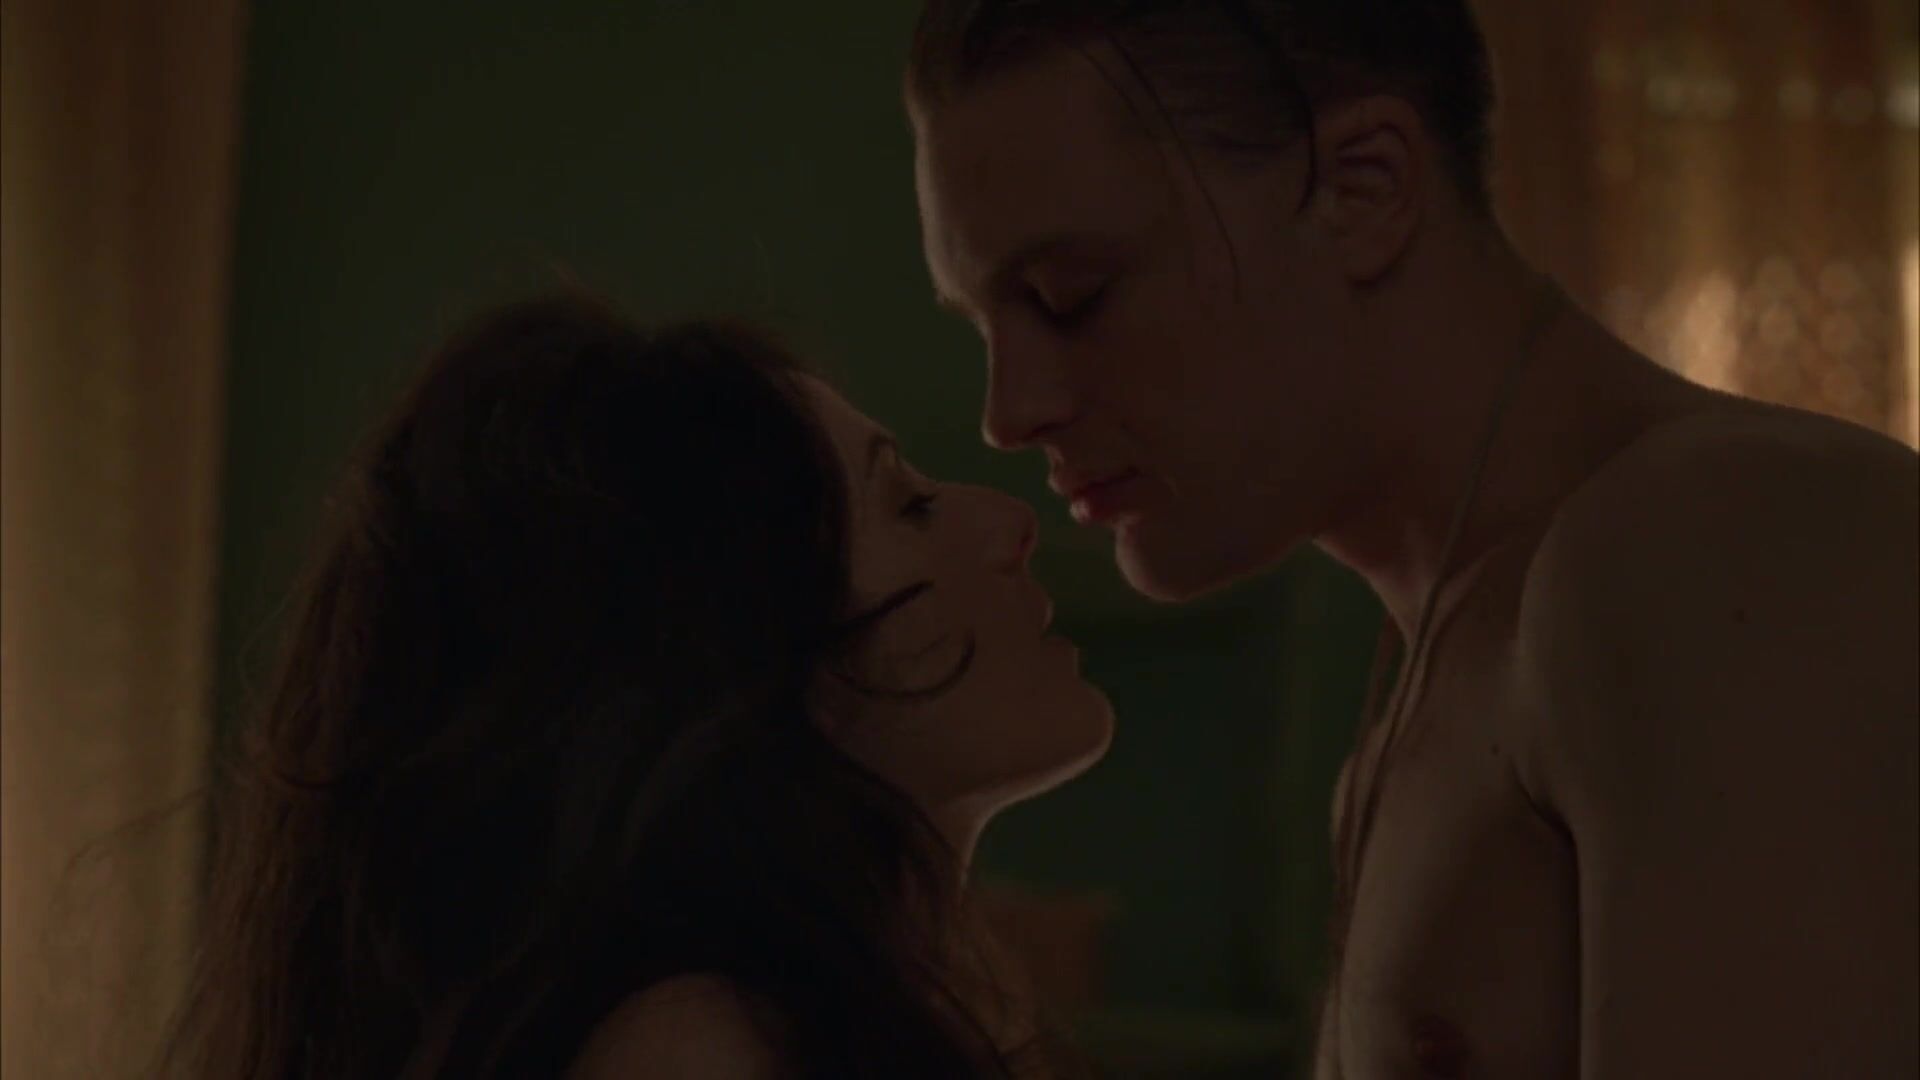 Pegging Man takes hot housewife and scores her cunt cumming right inside in Boardwalk Empire High Definition - 2